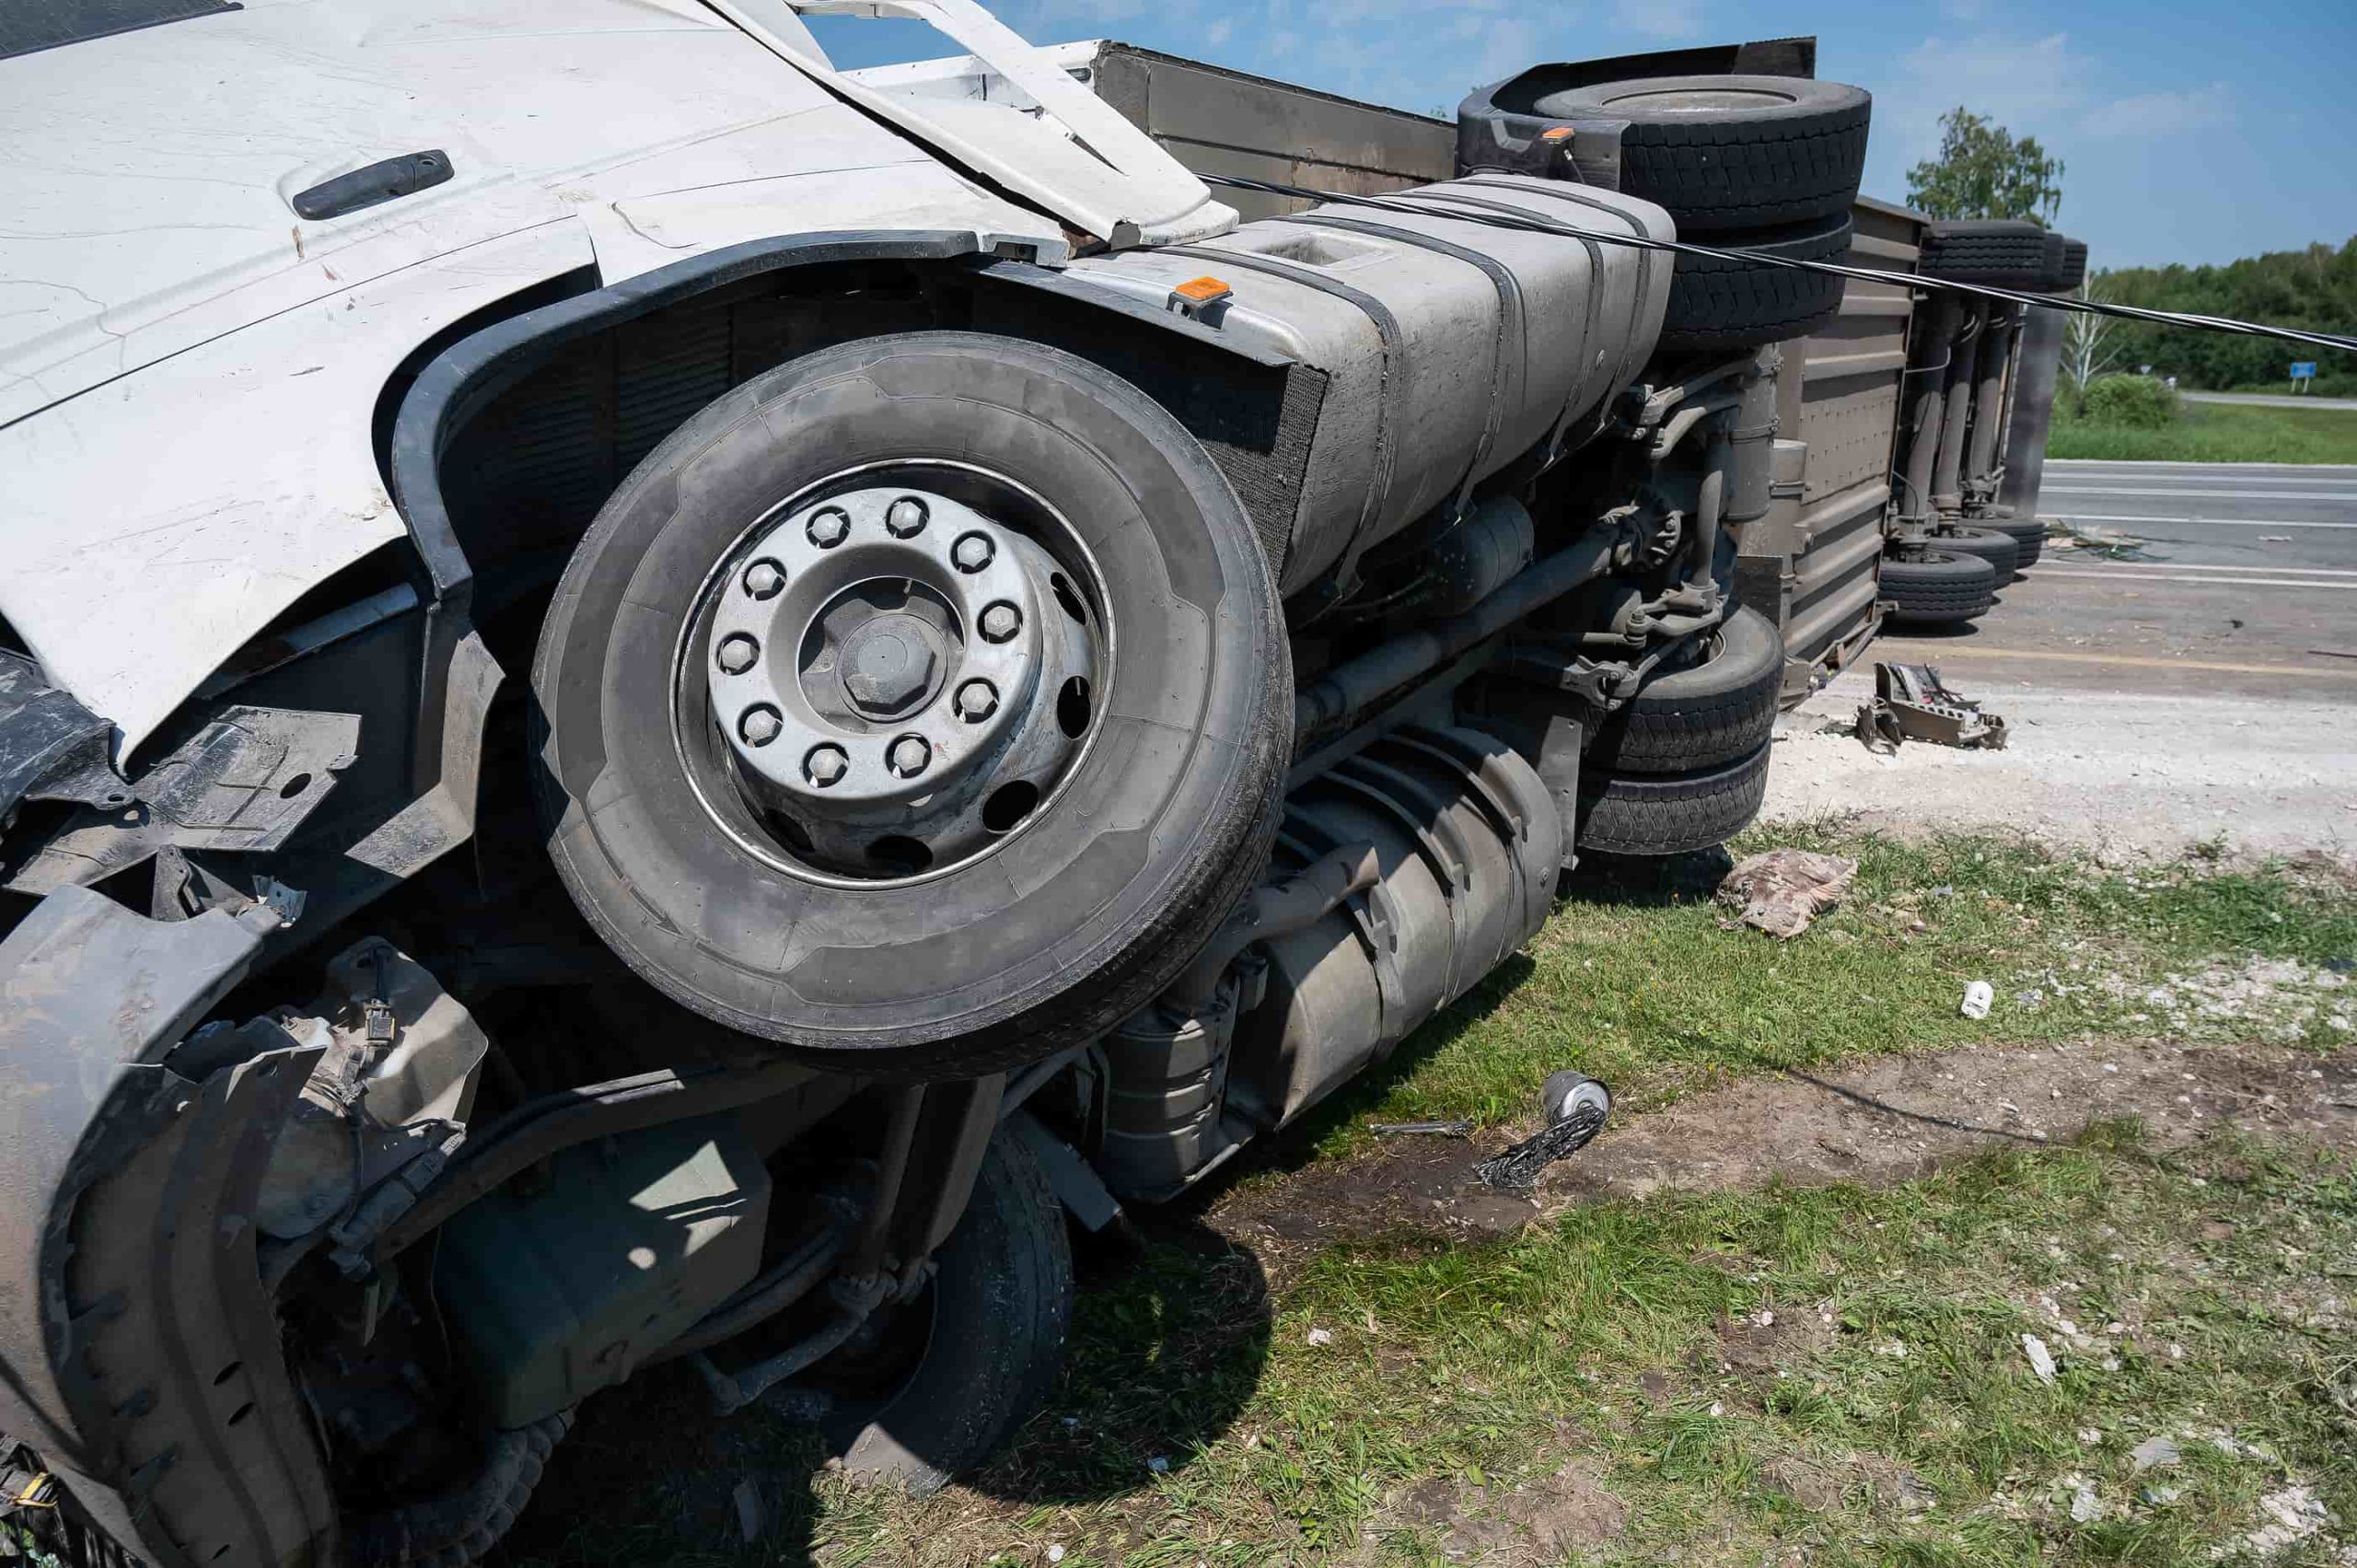 Serious Accidents Caused by Overloaded Trucks